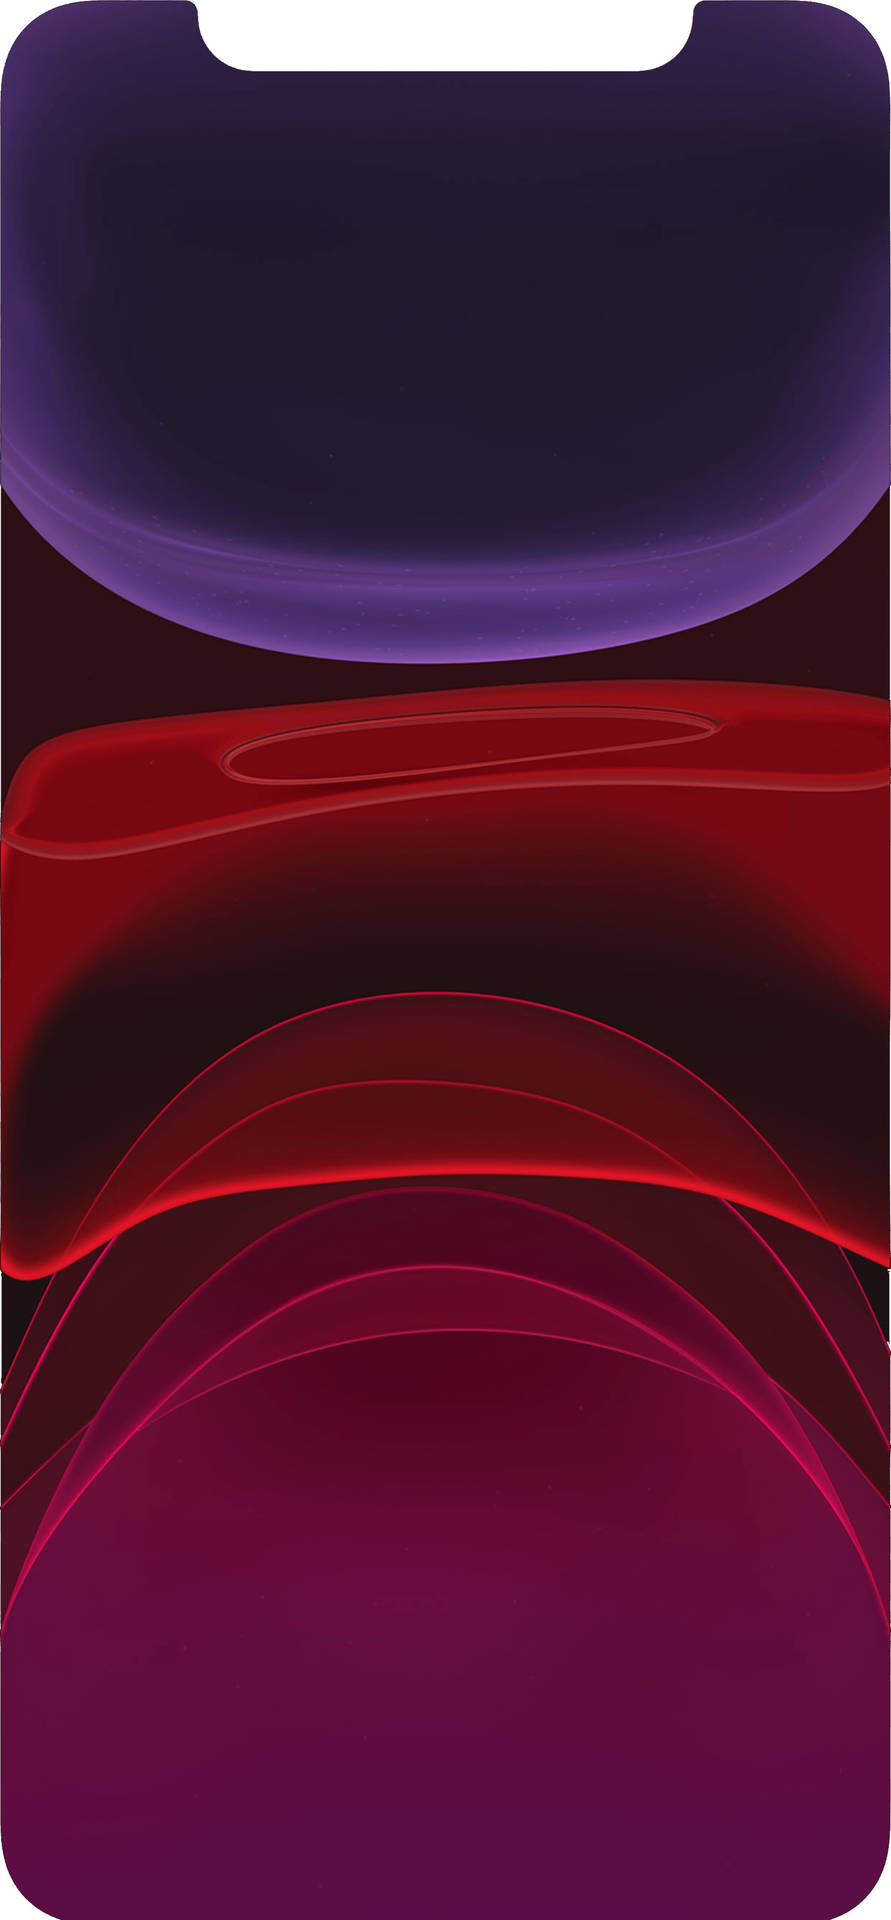 Cool Iphone 11 Purple And Red Blobs Wallpaper